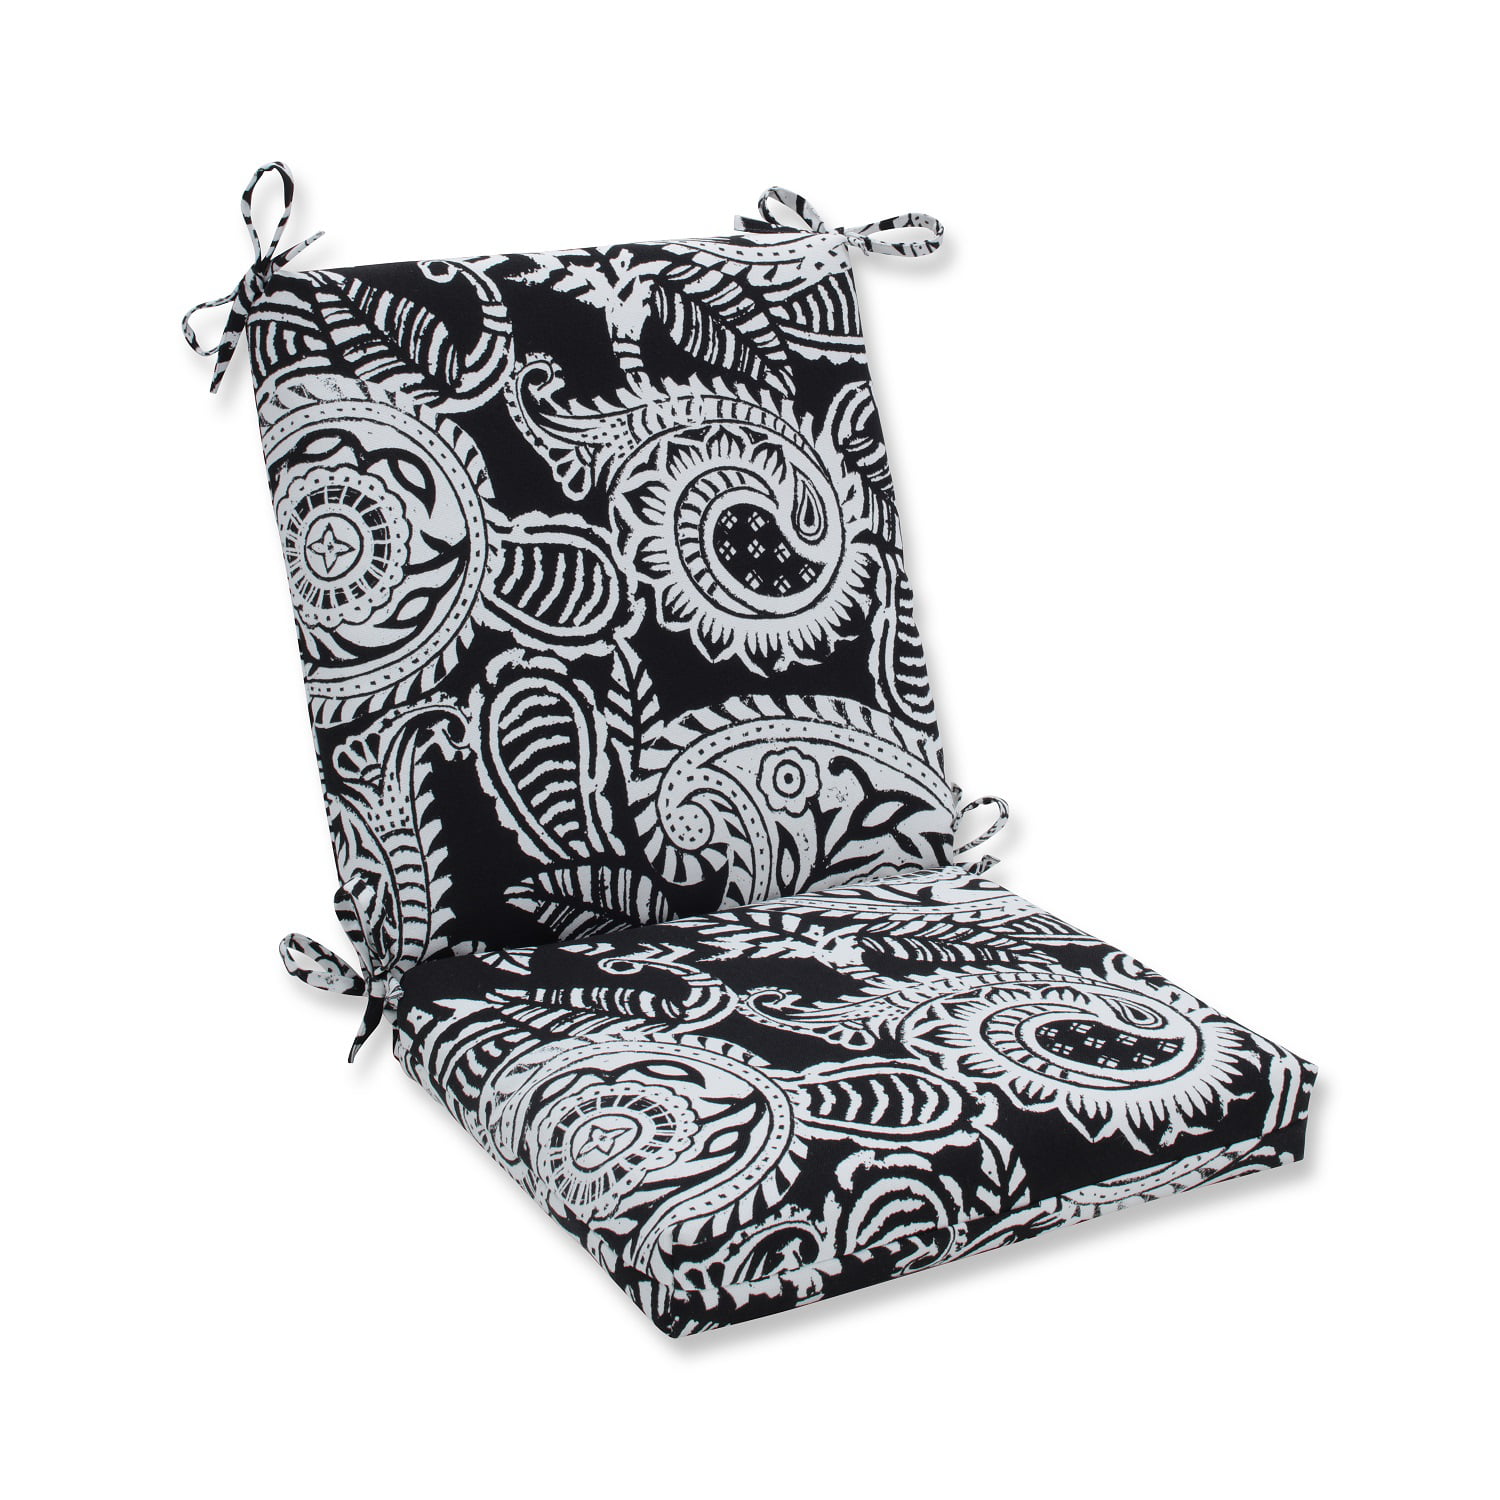 36.5” Black and White Paisley Swirl Outdoor Patio Chair